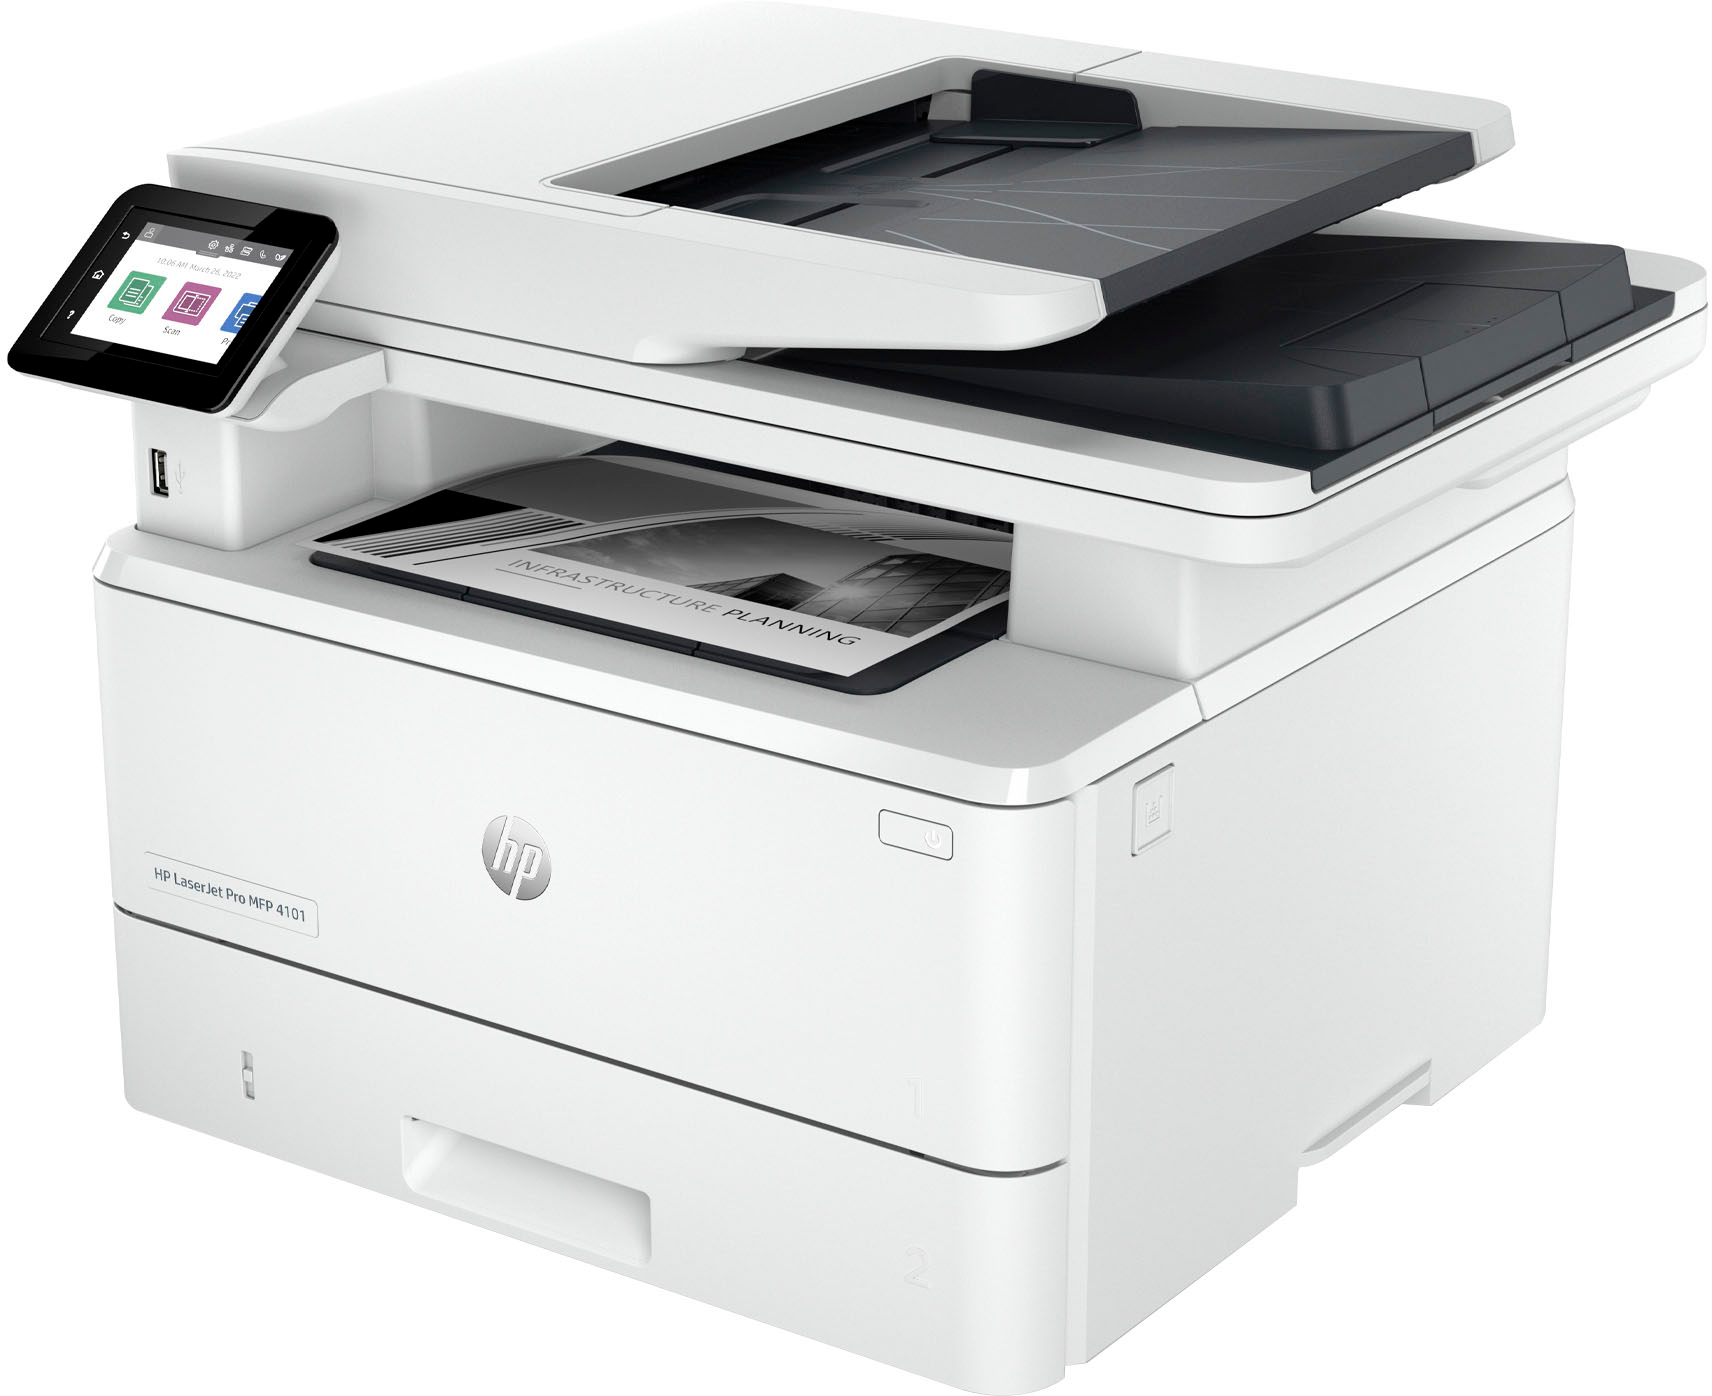 zout bibliothecaris Cursus HP LaserJet Pro MFP 4101fdne All-In-One Black-and-White Laser Printer with  3 months of Instant Ink included with HP+ White LaserJet Pro MFP 4101fdne -  Best Buy